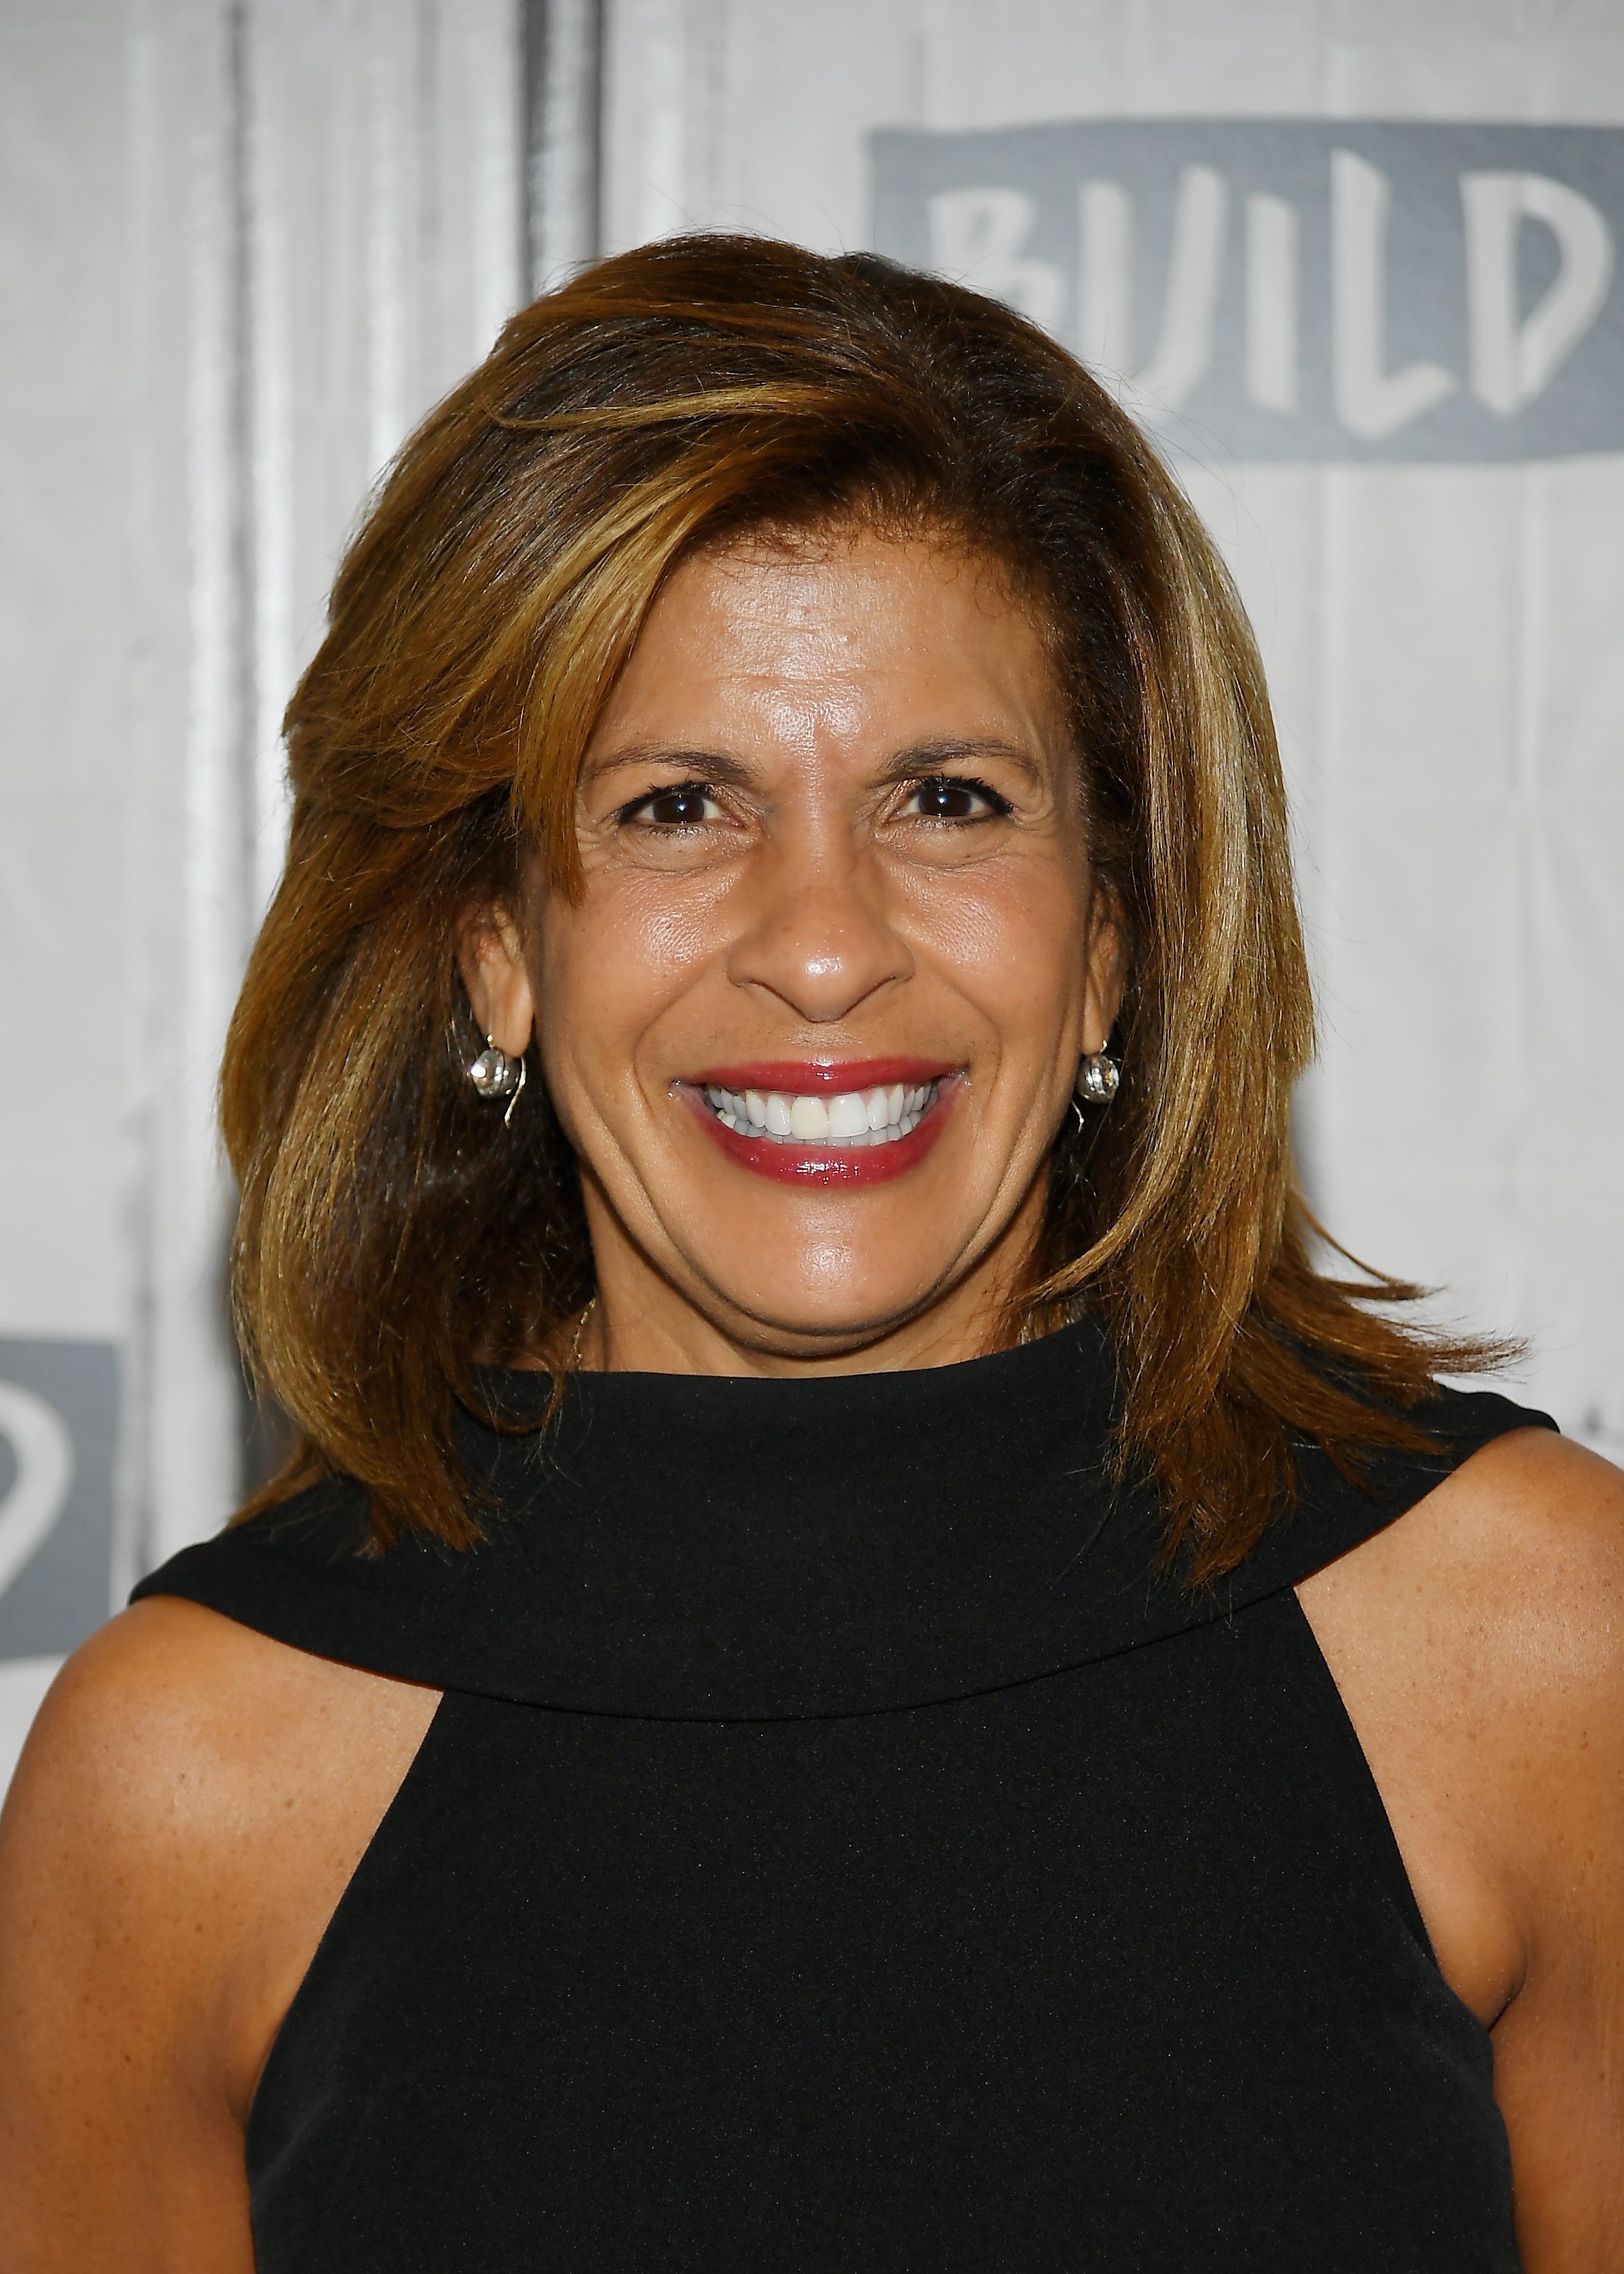 Hoda Kotb visits Build to discuss her new book "You Are My Happy" at Build Studio on March 12, 2019 in New York City | Photo: Getty Images